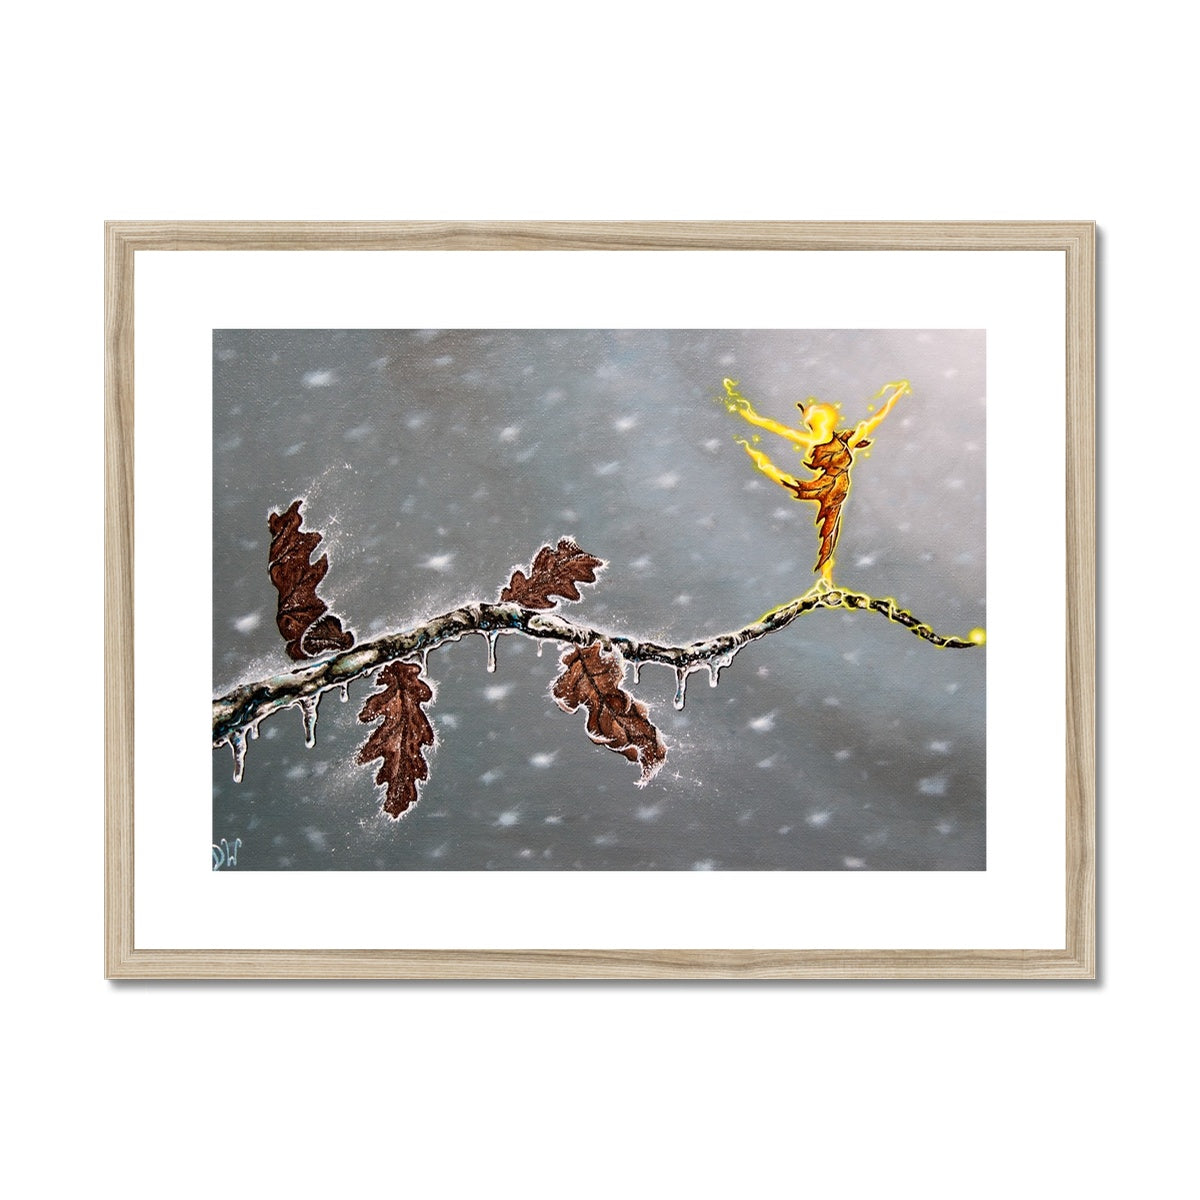 Autumn clinging to Winters Chill Framed & Mounted Print